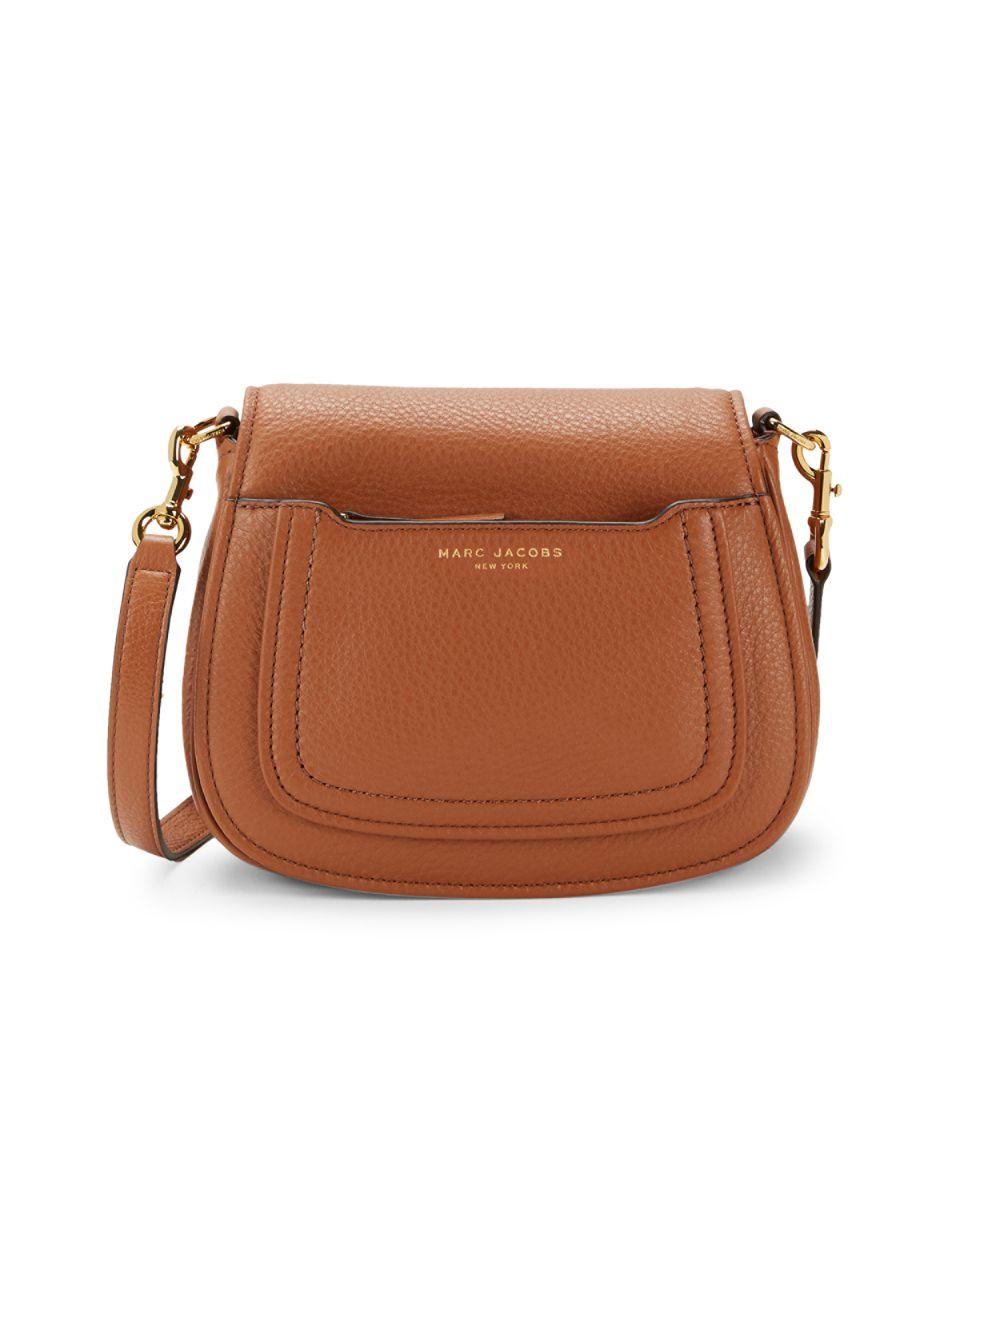 Marc Jacobs Pebbled Leather Mini Saddle Crossbody Bag in Brown - Lyst